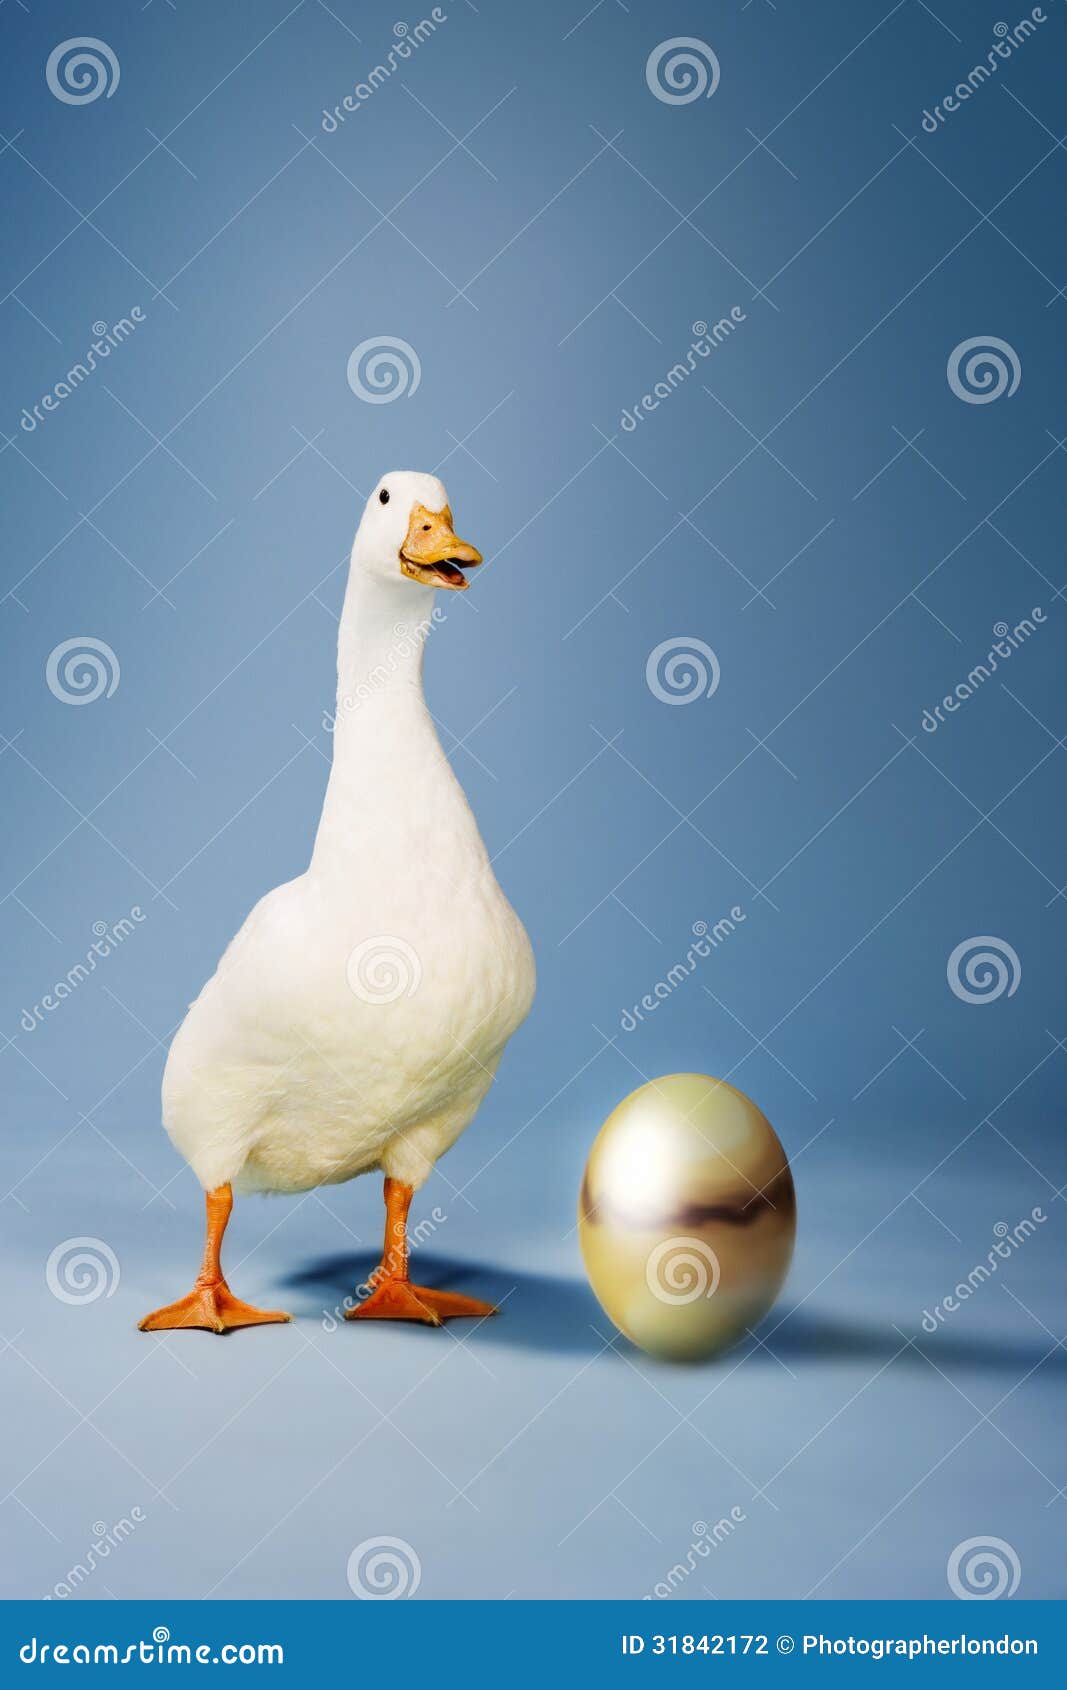 Goose Standing by Golden Egg Stock Photo - Image of domesticated ...